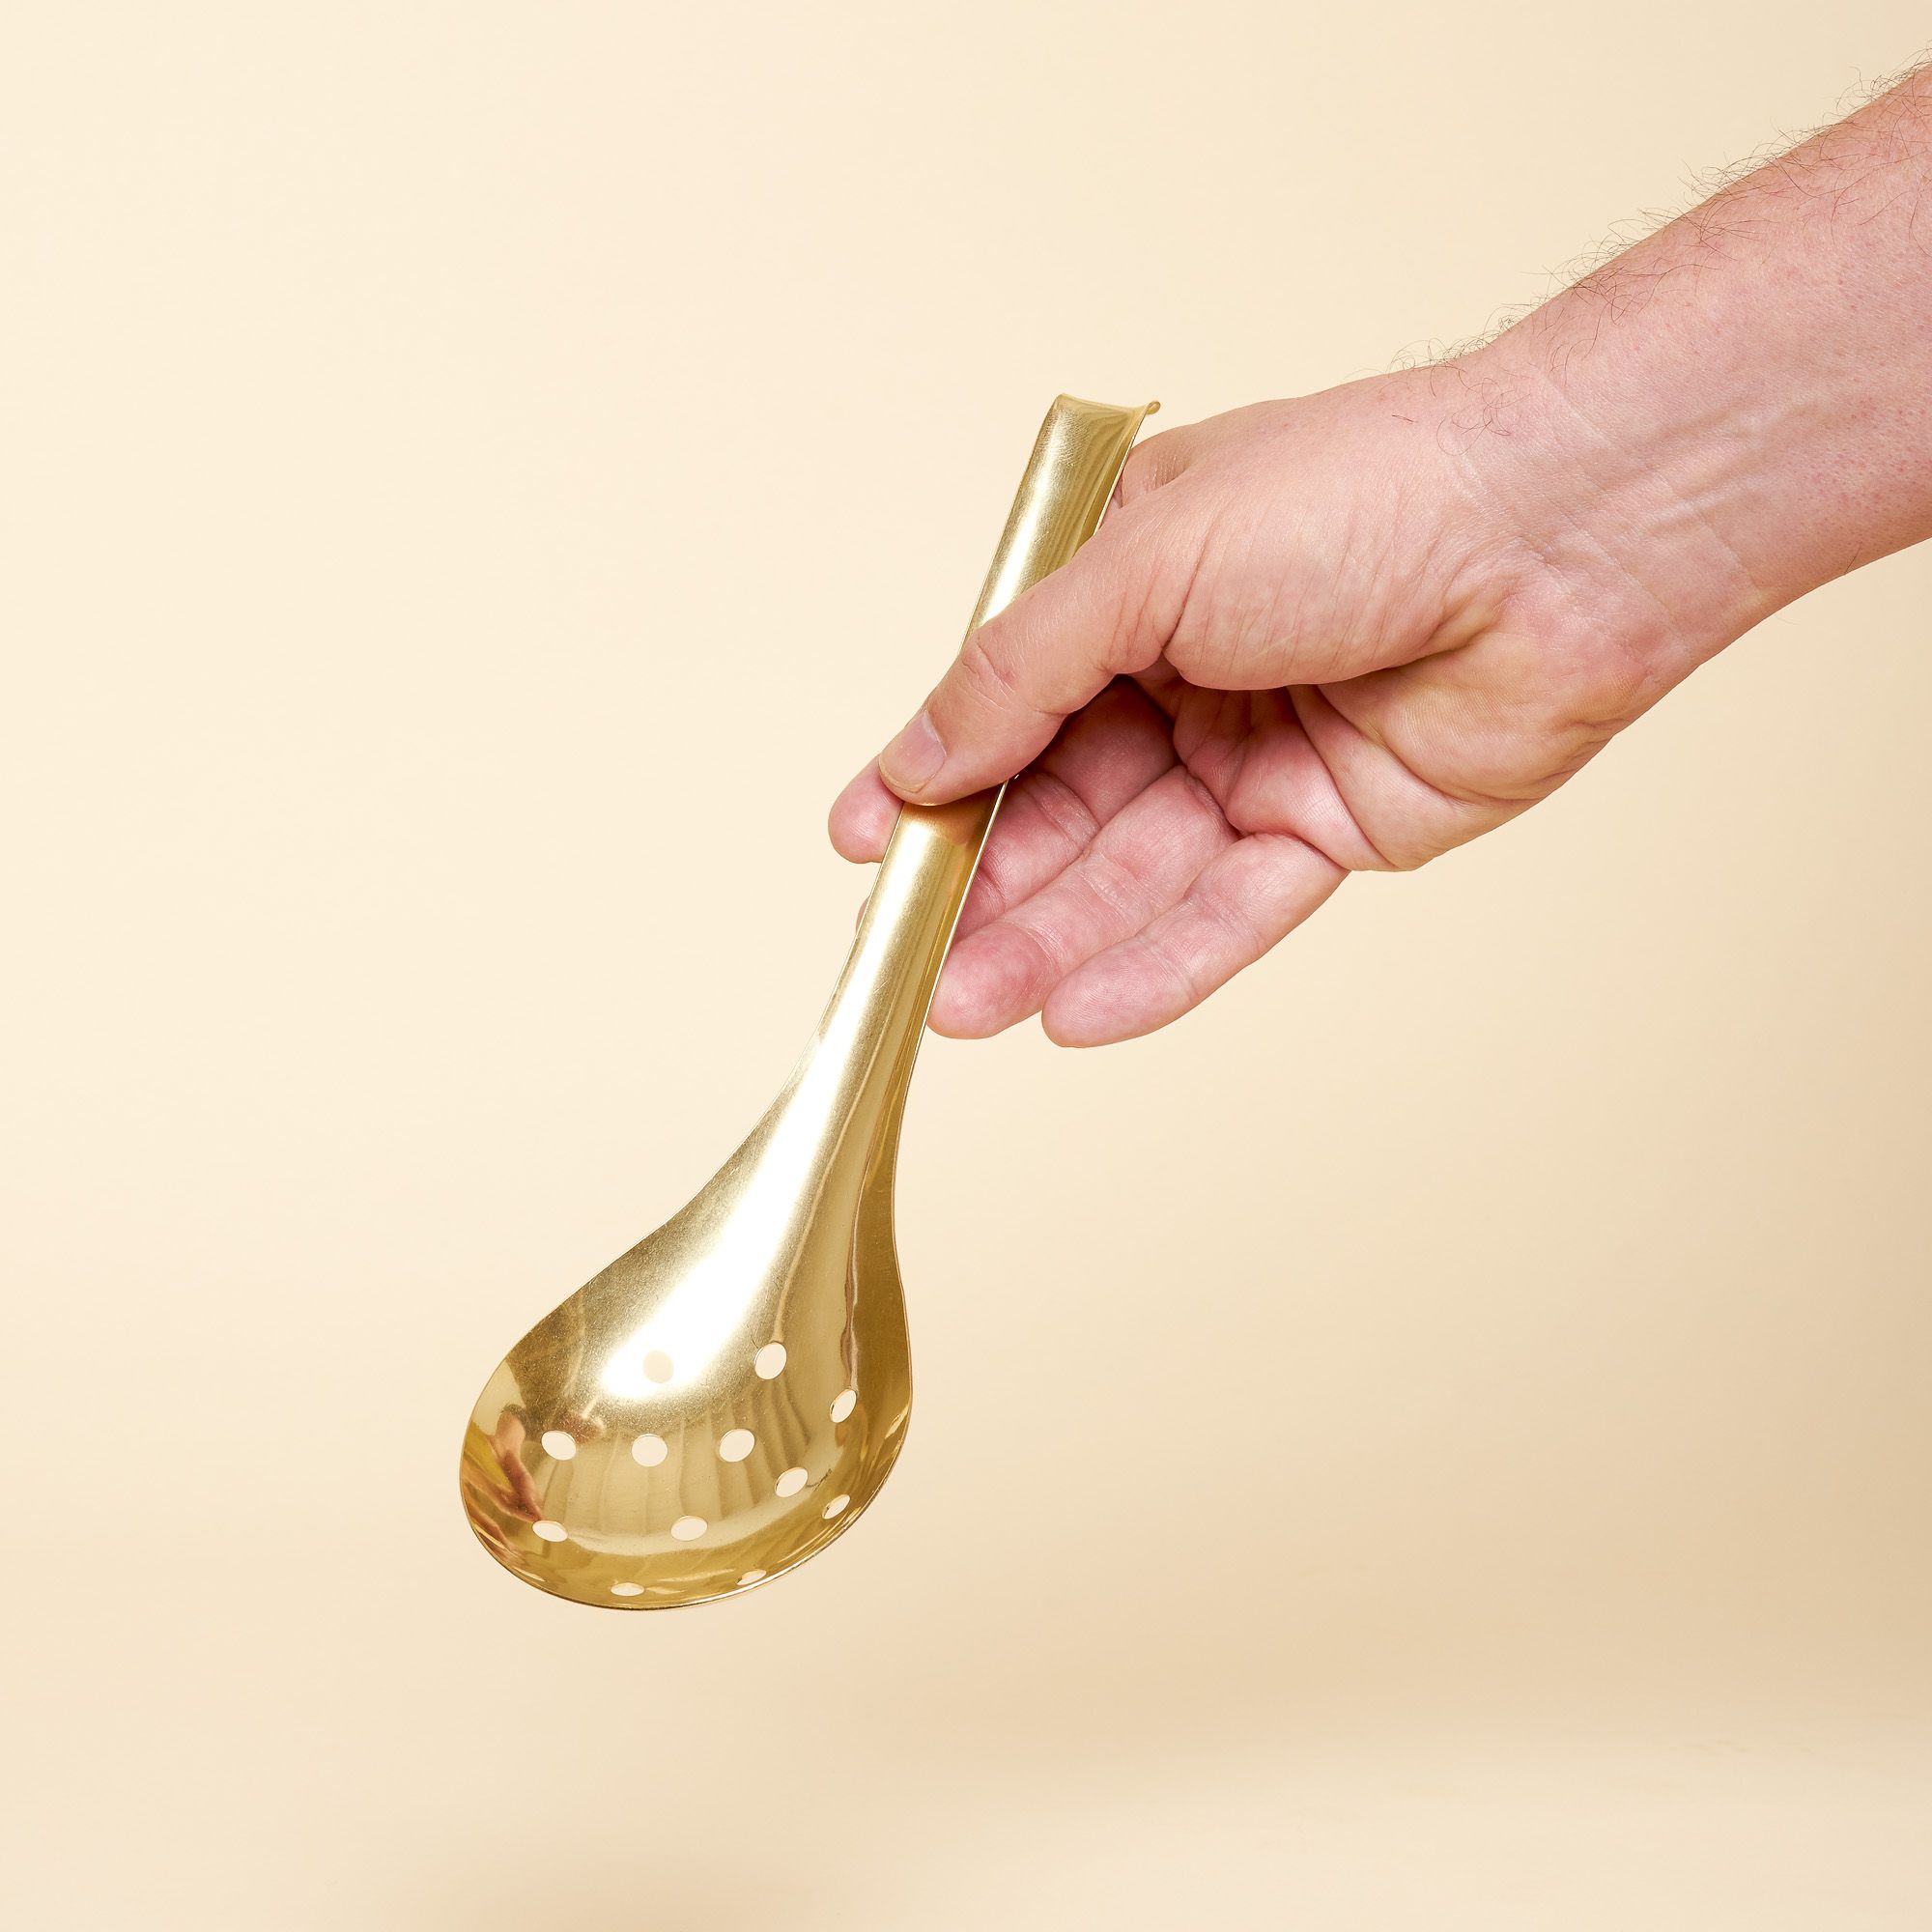 A brass ladle with a round circular bottom. Comes in solid brass or slated with small holes that allows liquid to pass through.